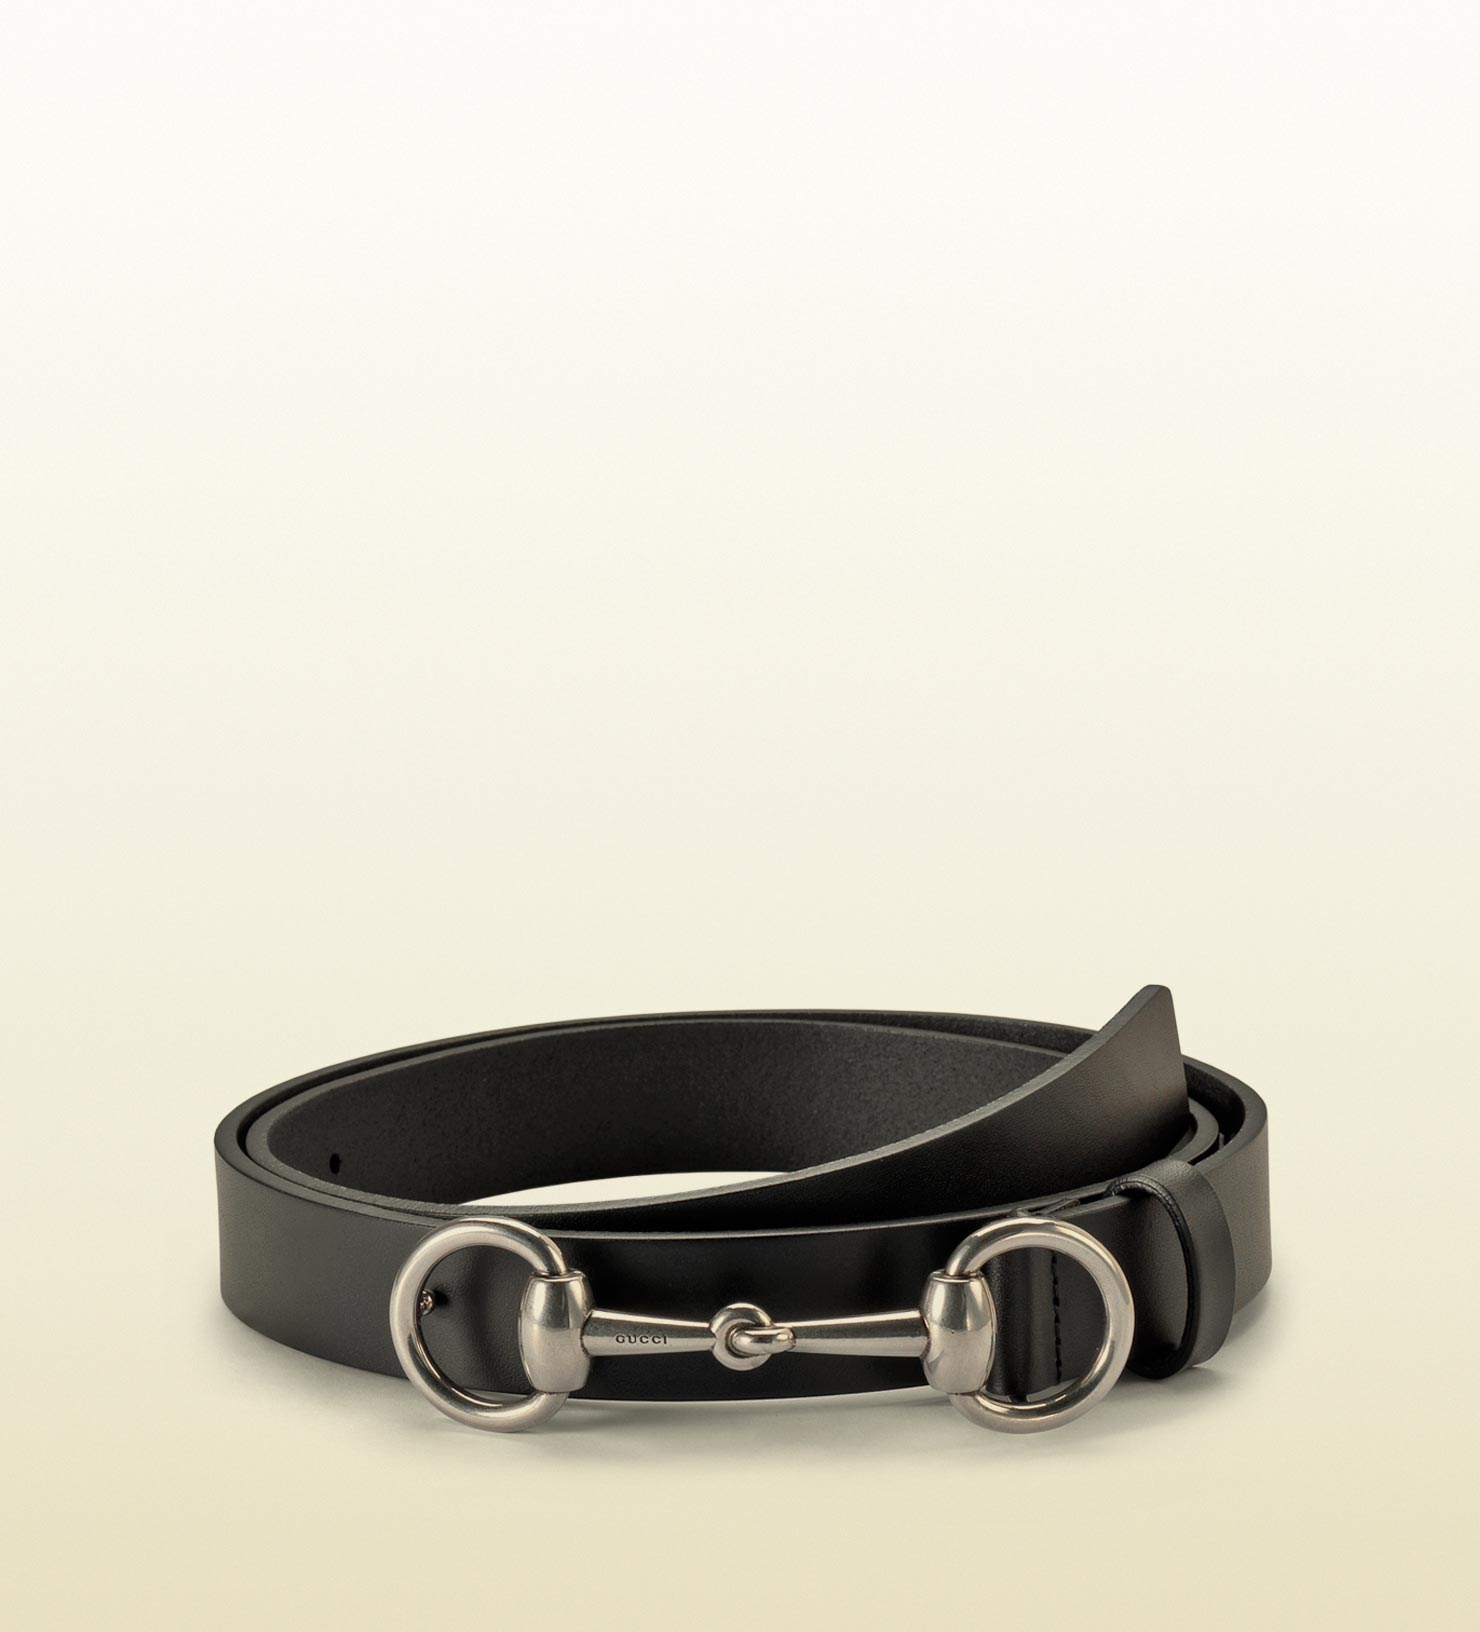 Gucci Black Leather Belt With Horsebit Buckle for Men - Lyst